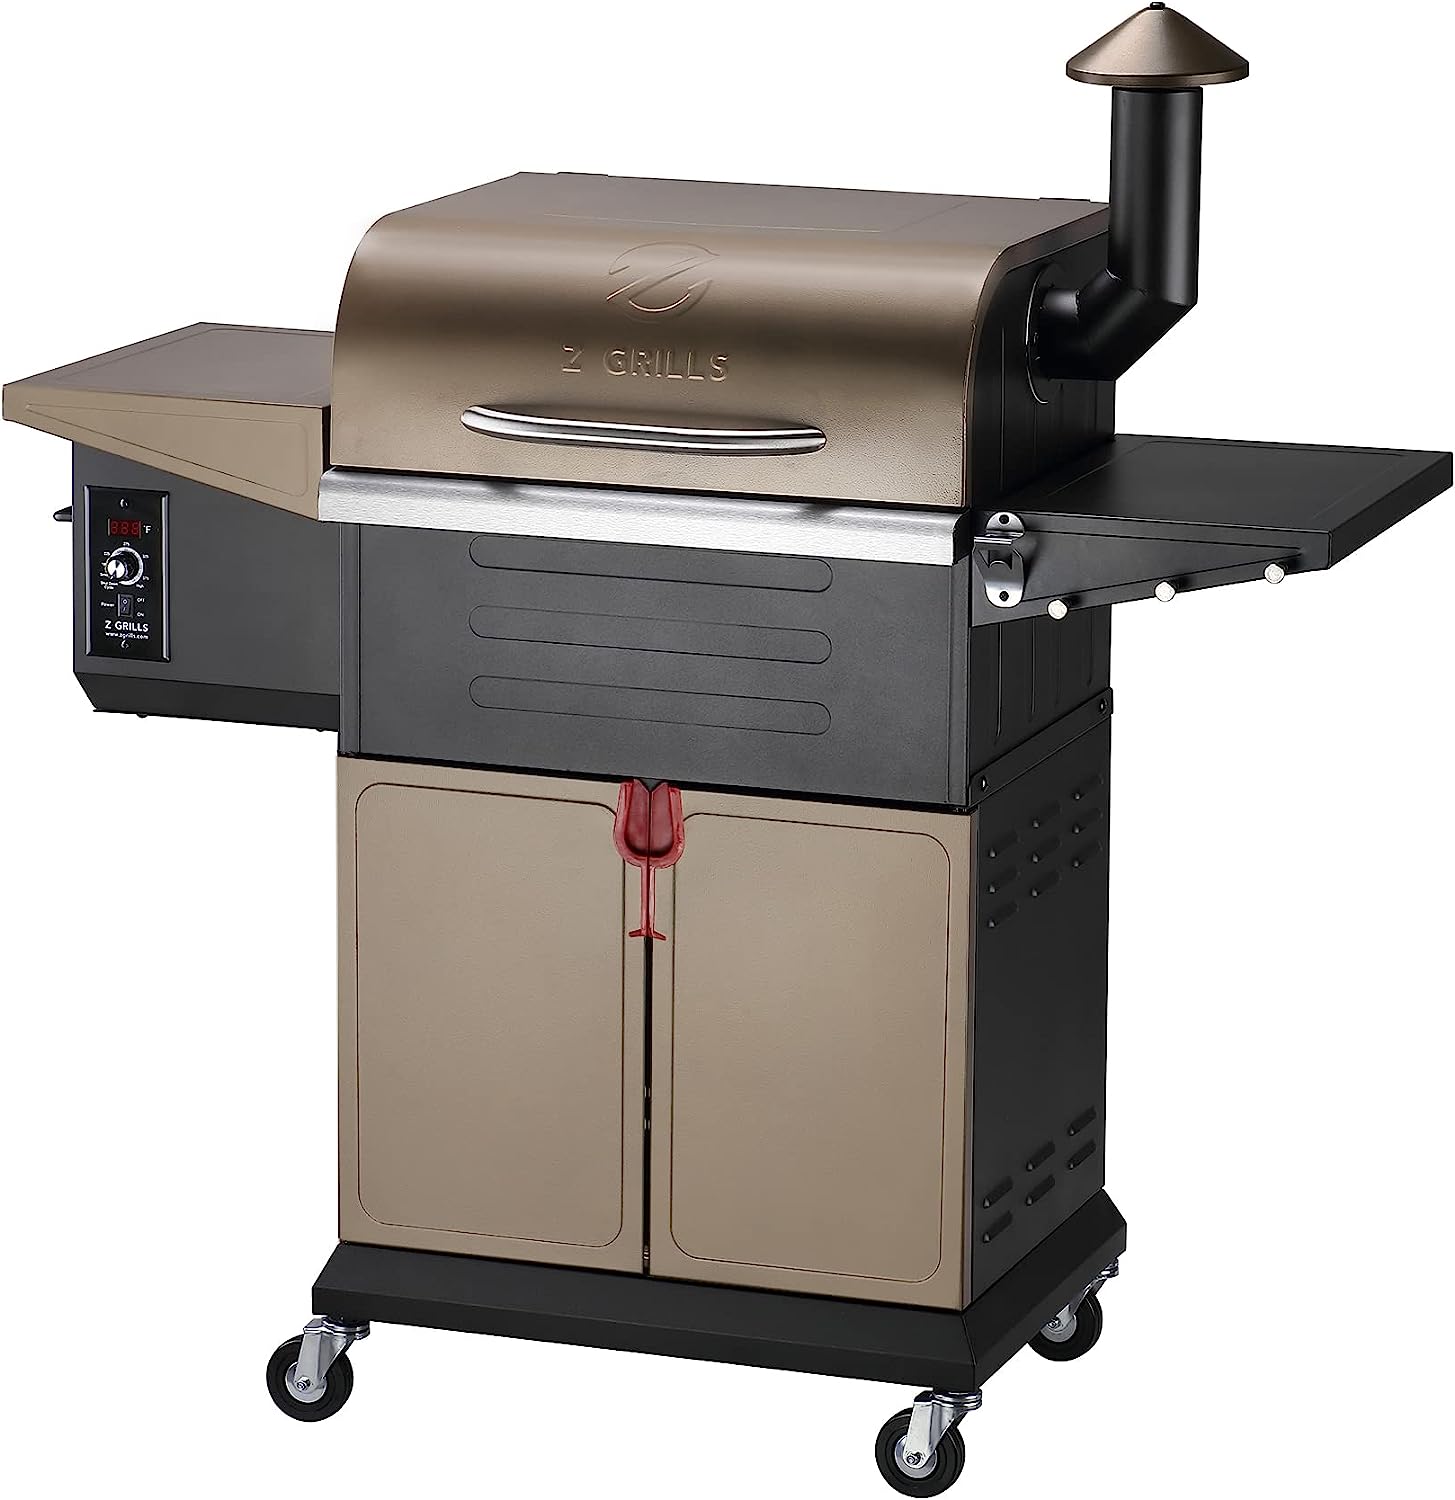 Z GRILLS Wood Pellet Grill and Smoker with PID Controller - $270